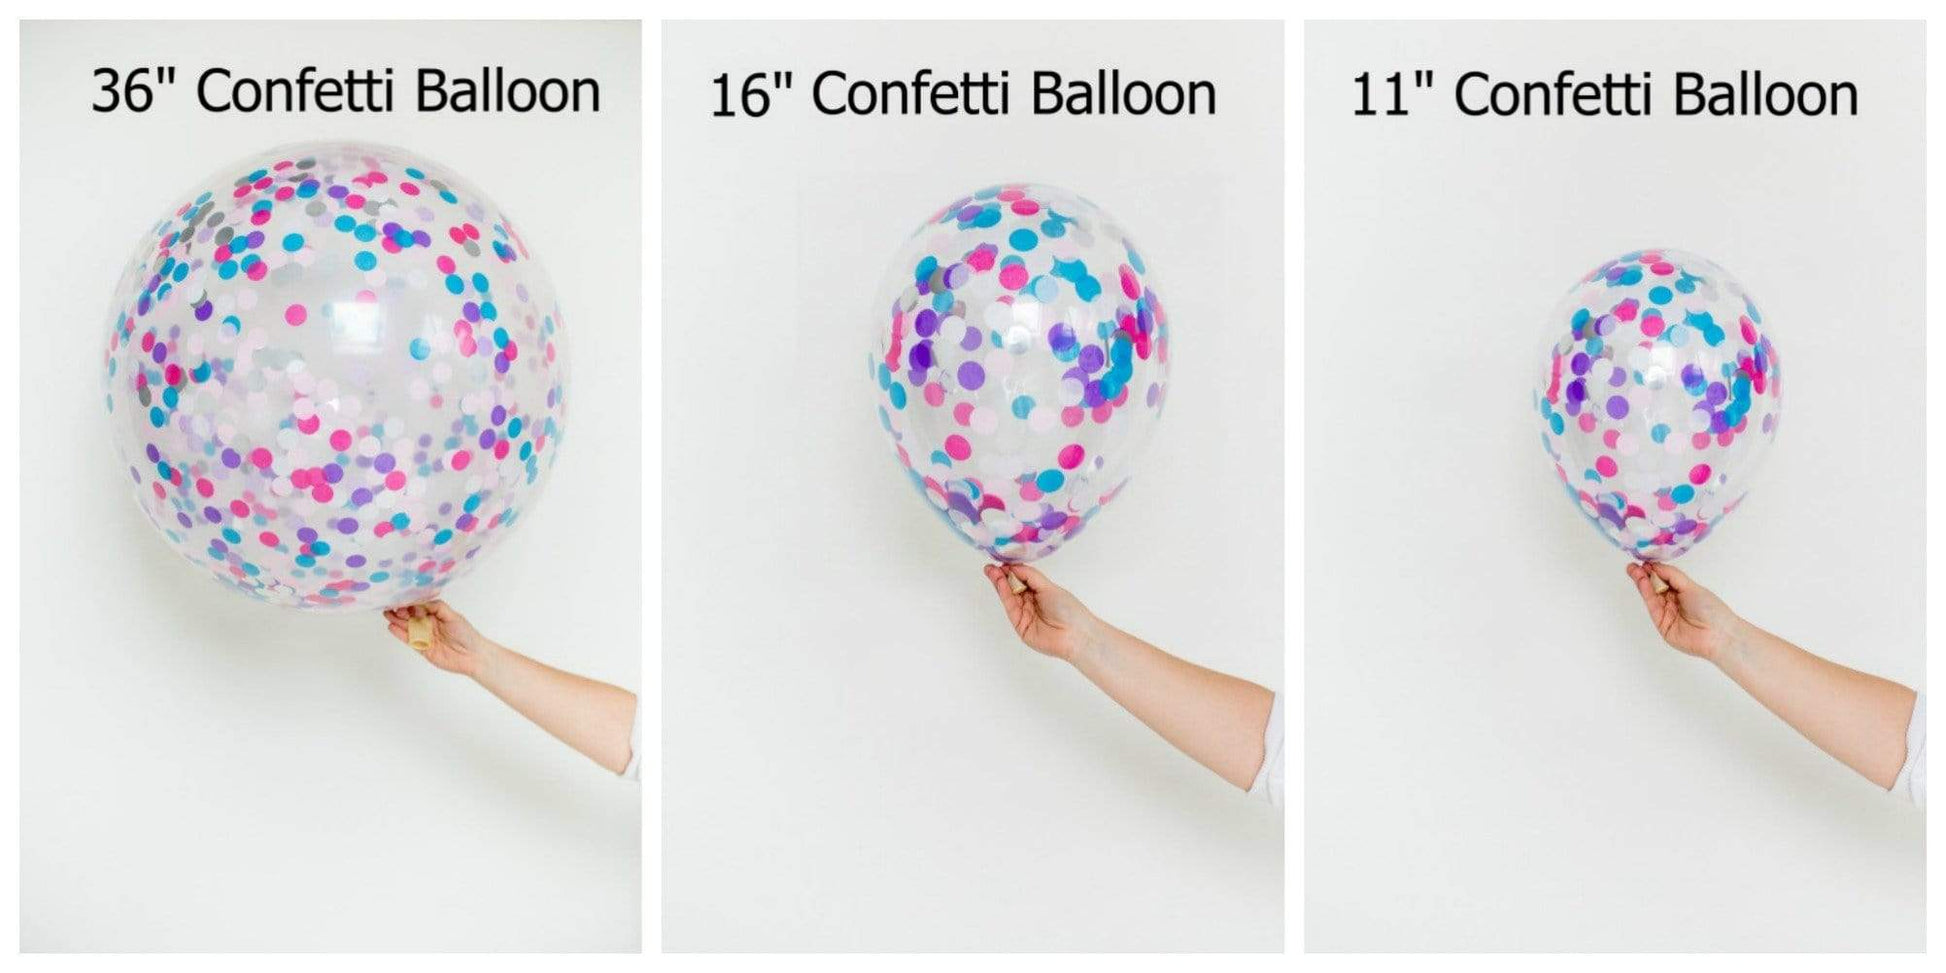 Bespoke Confetti Balloons | Custom Made Confetti Filled Balloons UK Pretty Little Party Shop